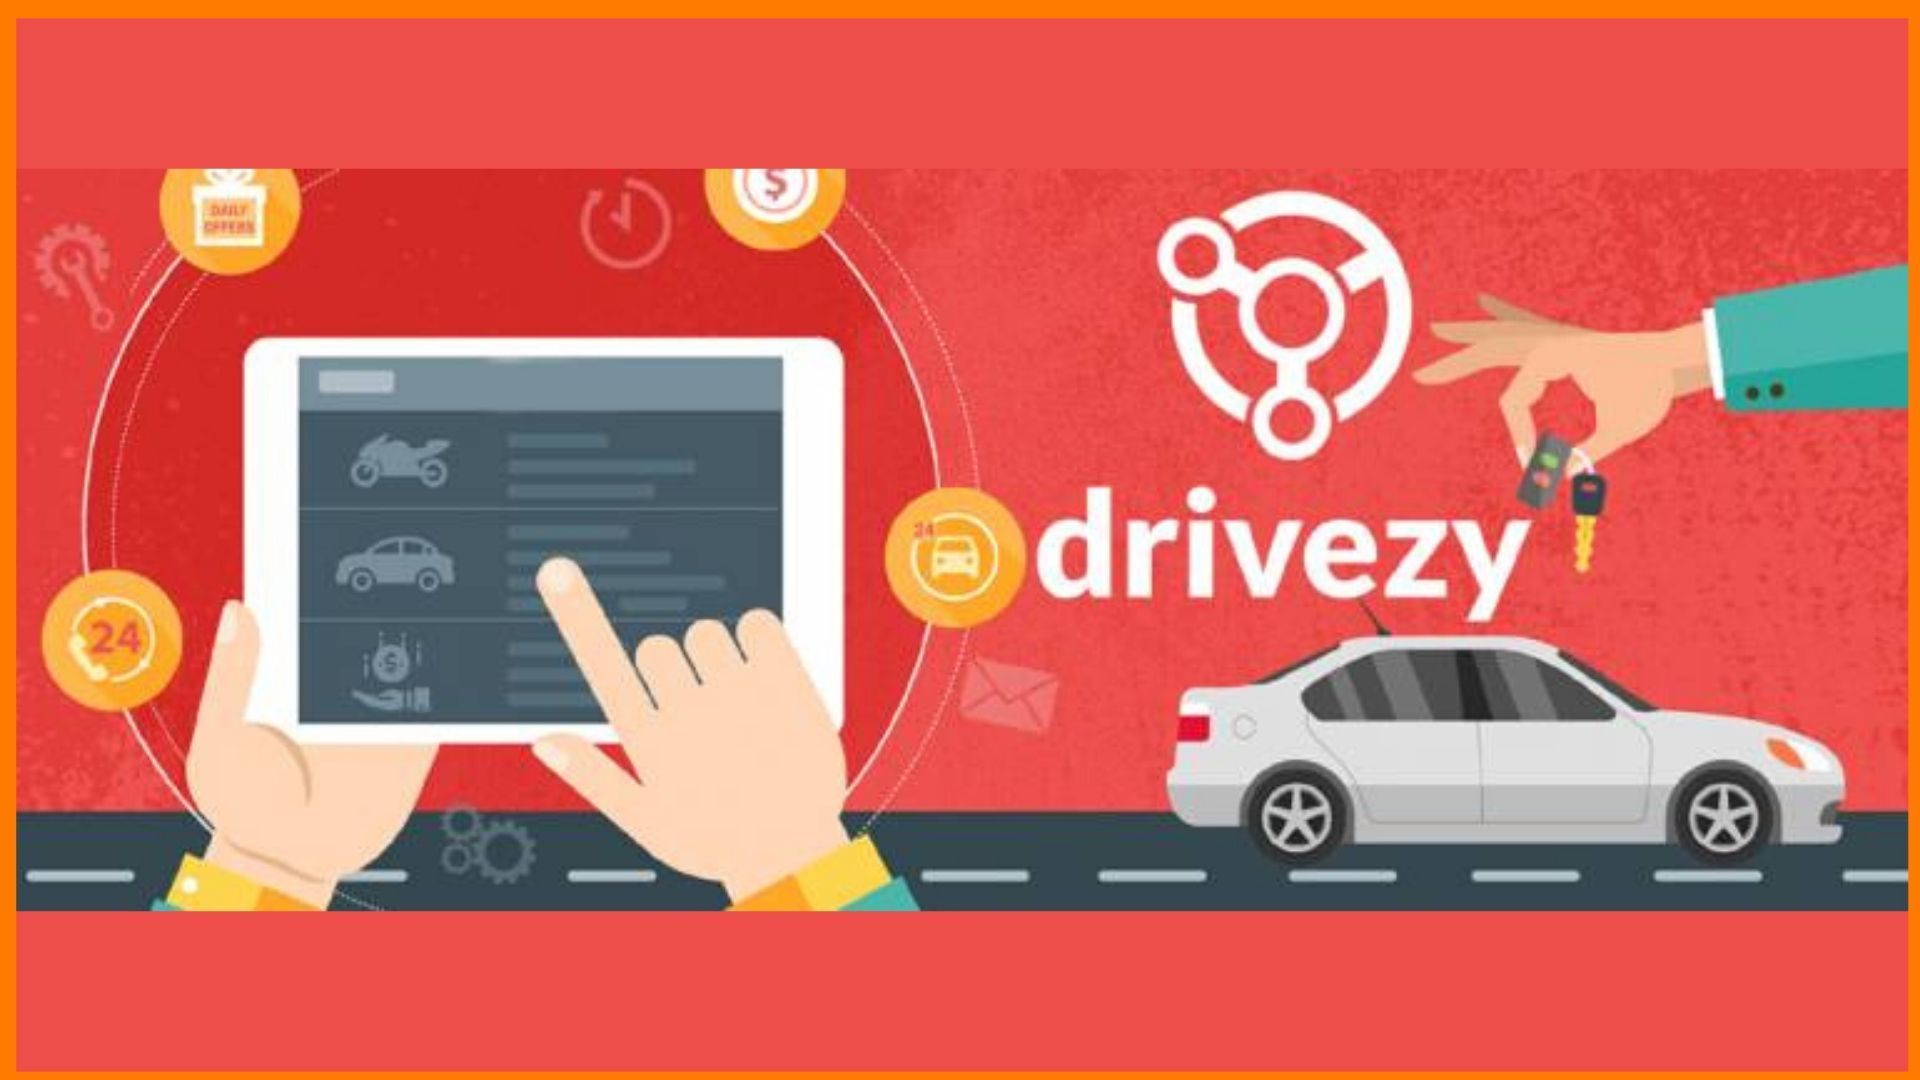 Drivezy - Self-driven Cars at the Most Affordable Prices!